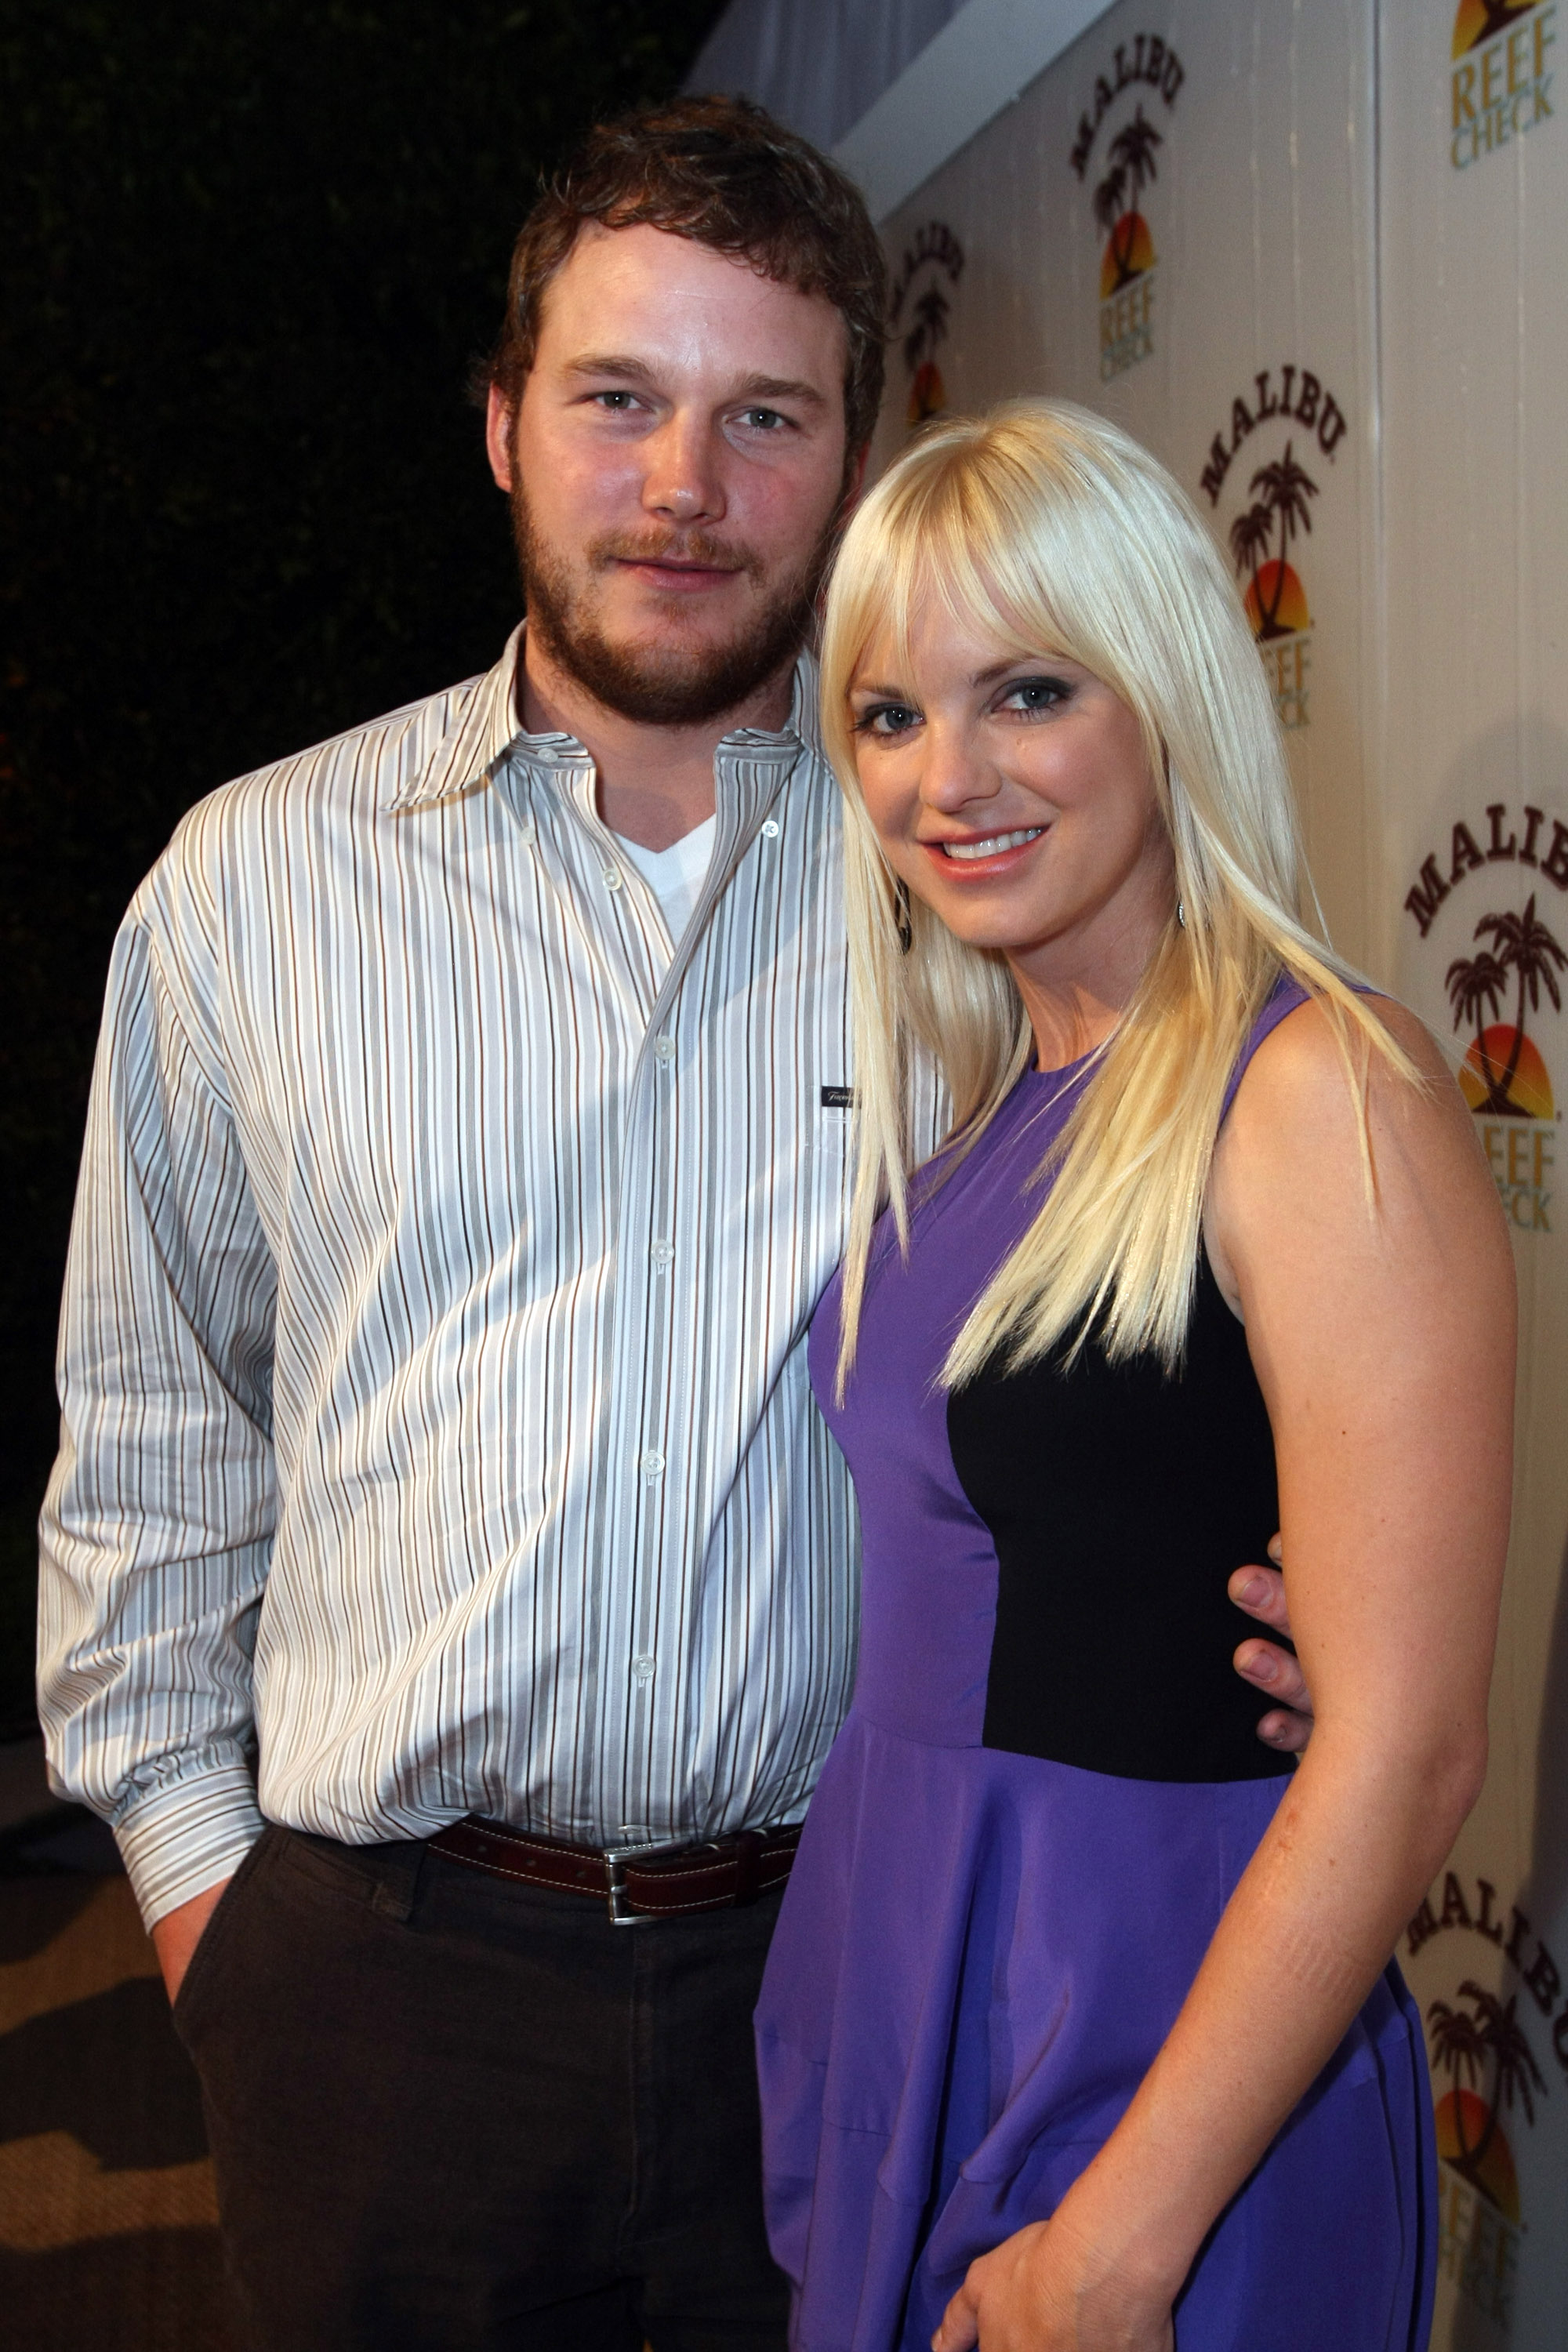 Chris Pratt and Anna Faris on August 11, 2009 in Beverly Hills, California | Source: Getty Images